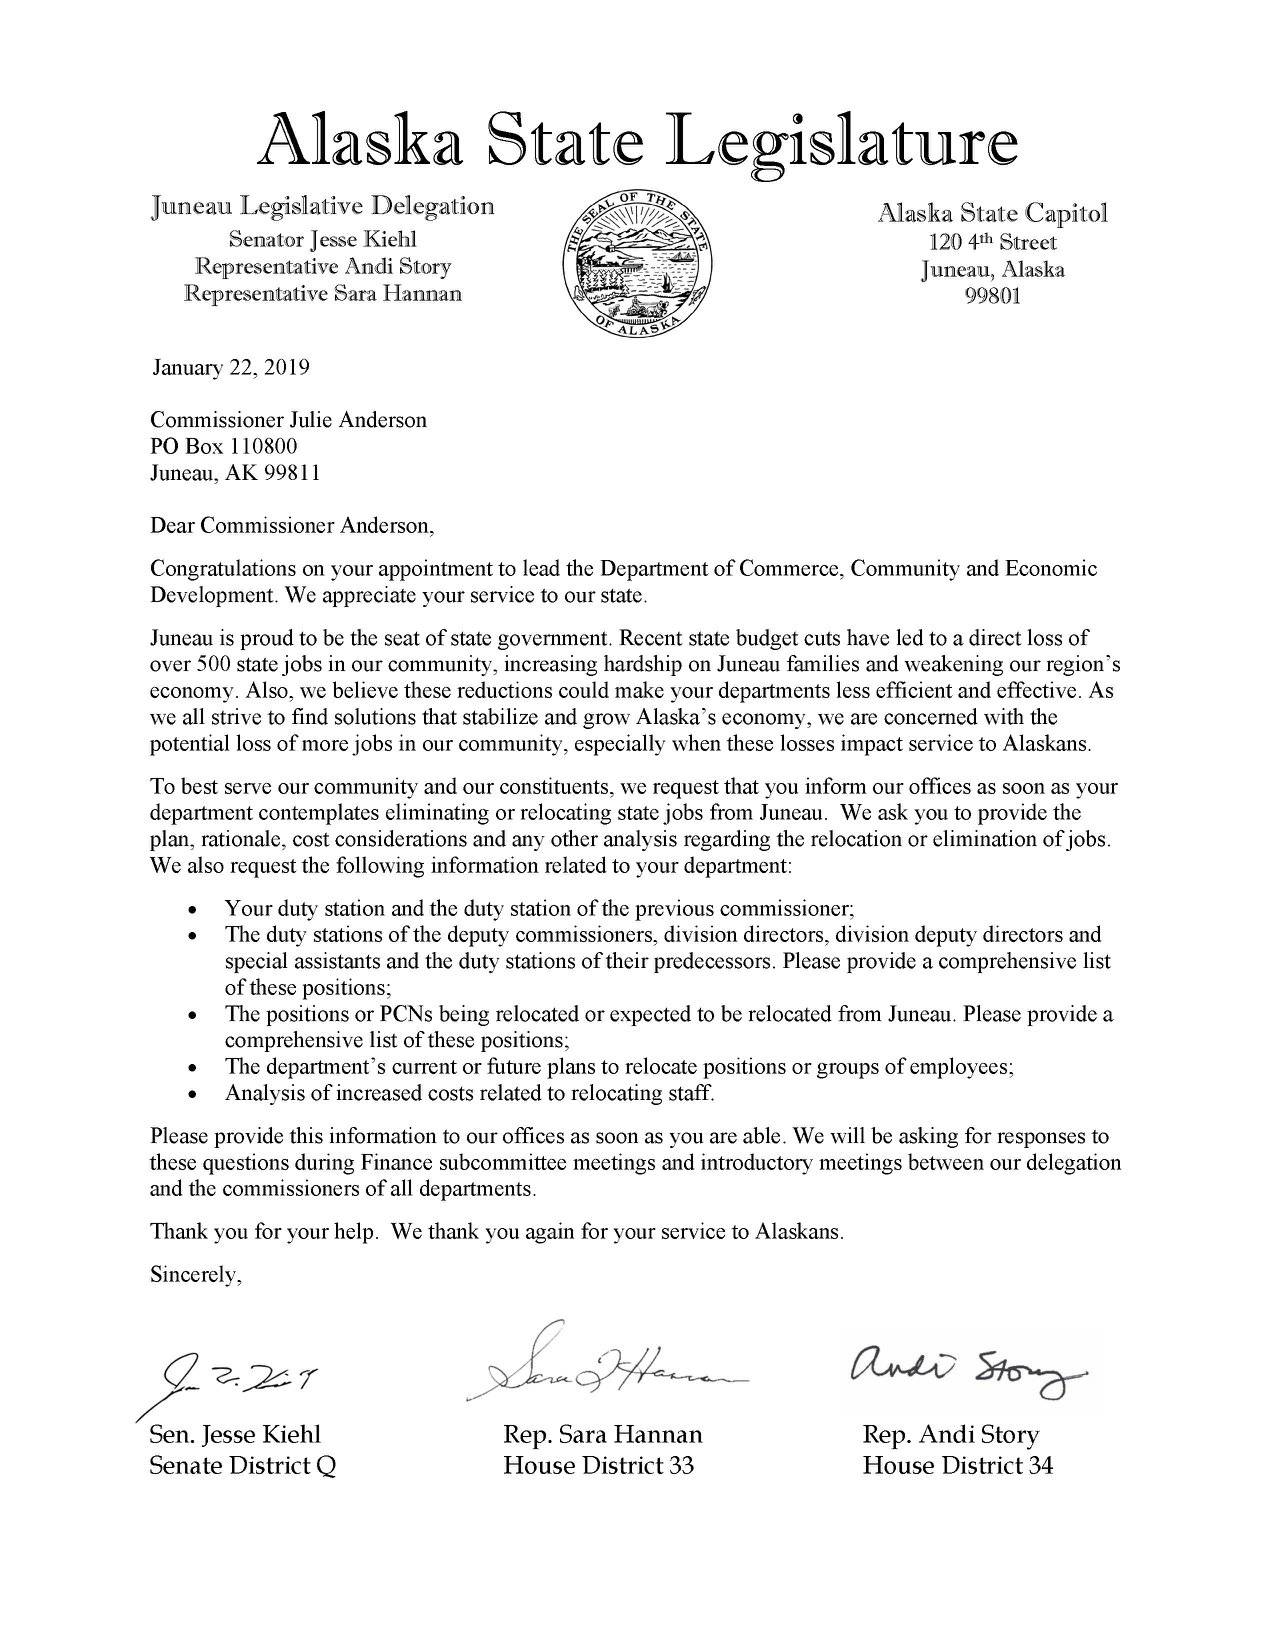 Juneau’s lawmakers sent this letter expressing concern about state jobs leaving Juneau. (Courtesy photo | Representative Andi Story on Facebook)